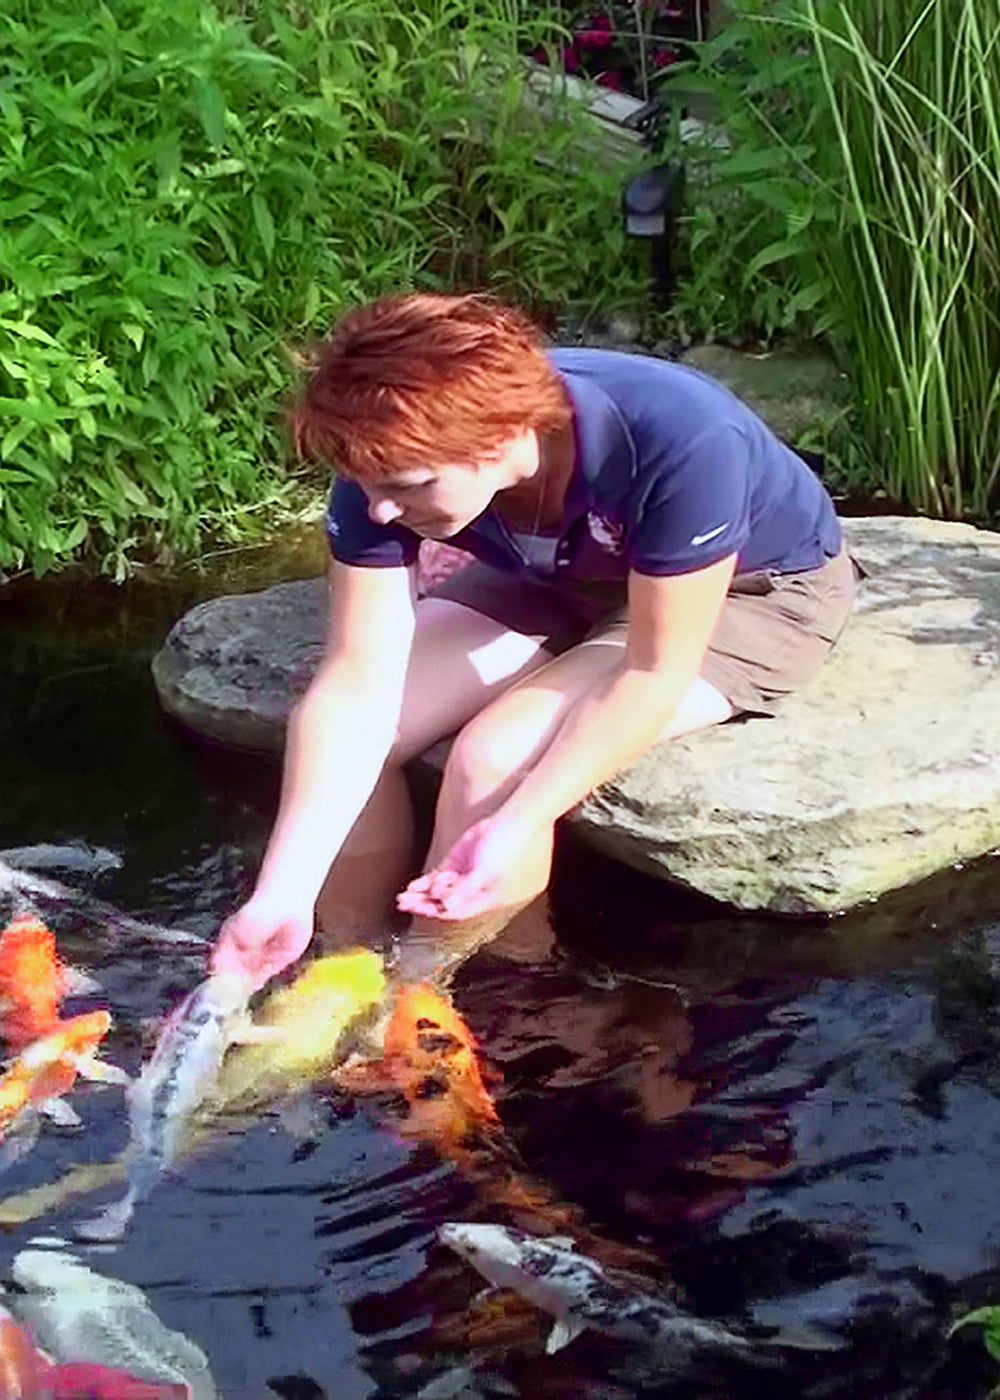 Pamela Russell hand feeding large koi fish sitting on a boulder with her feet dangling into the koi pond with koi fish all around her feet